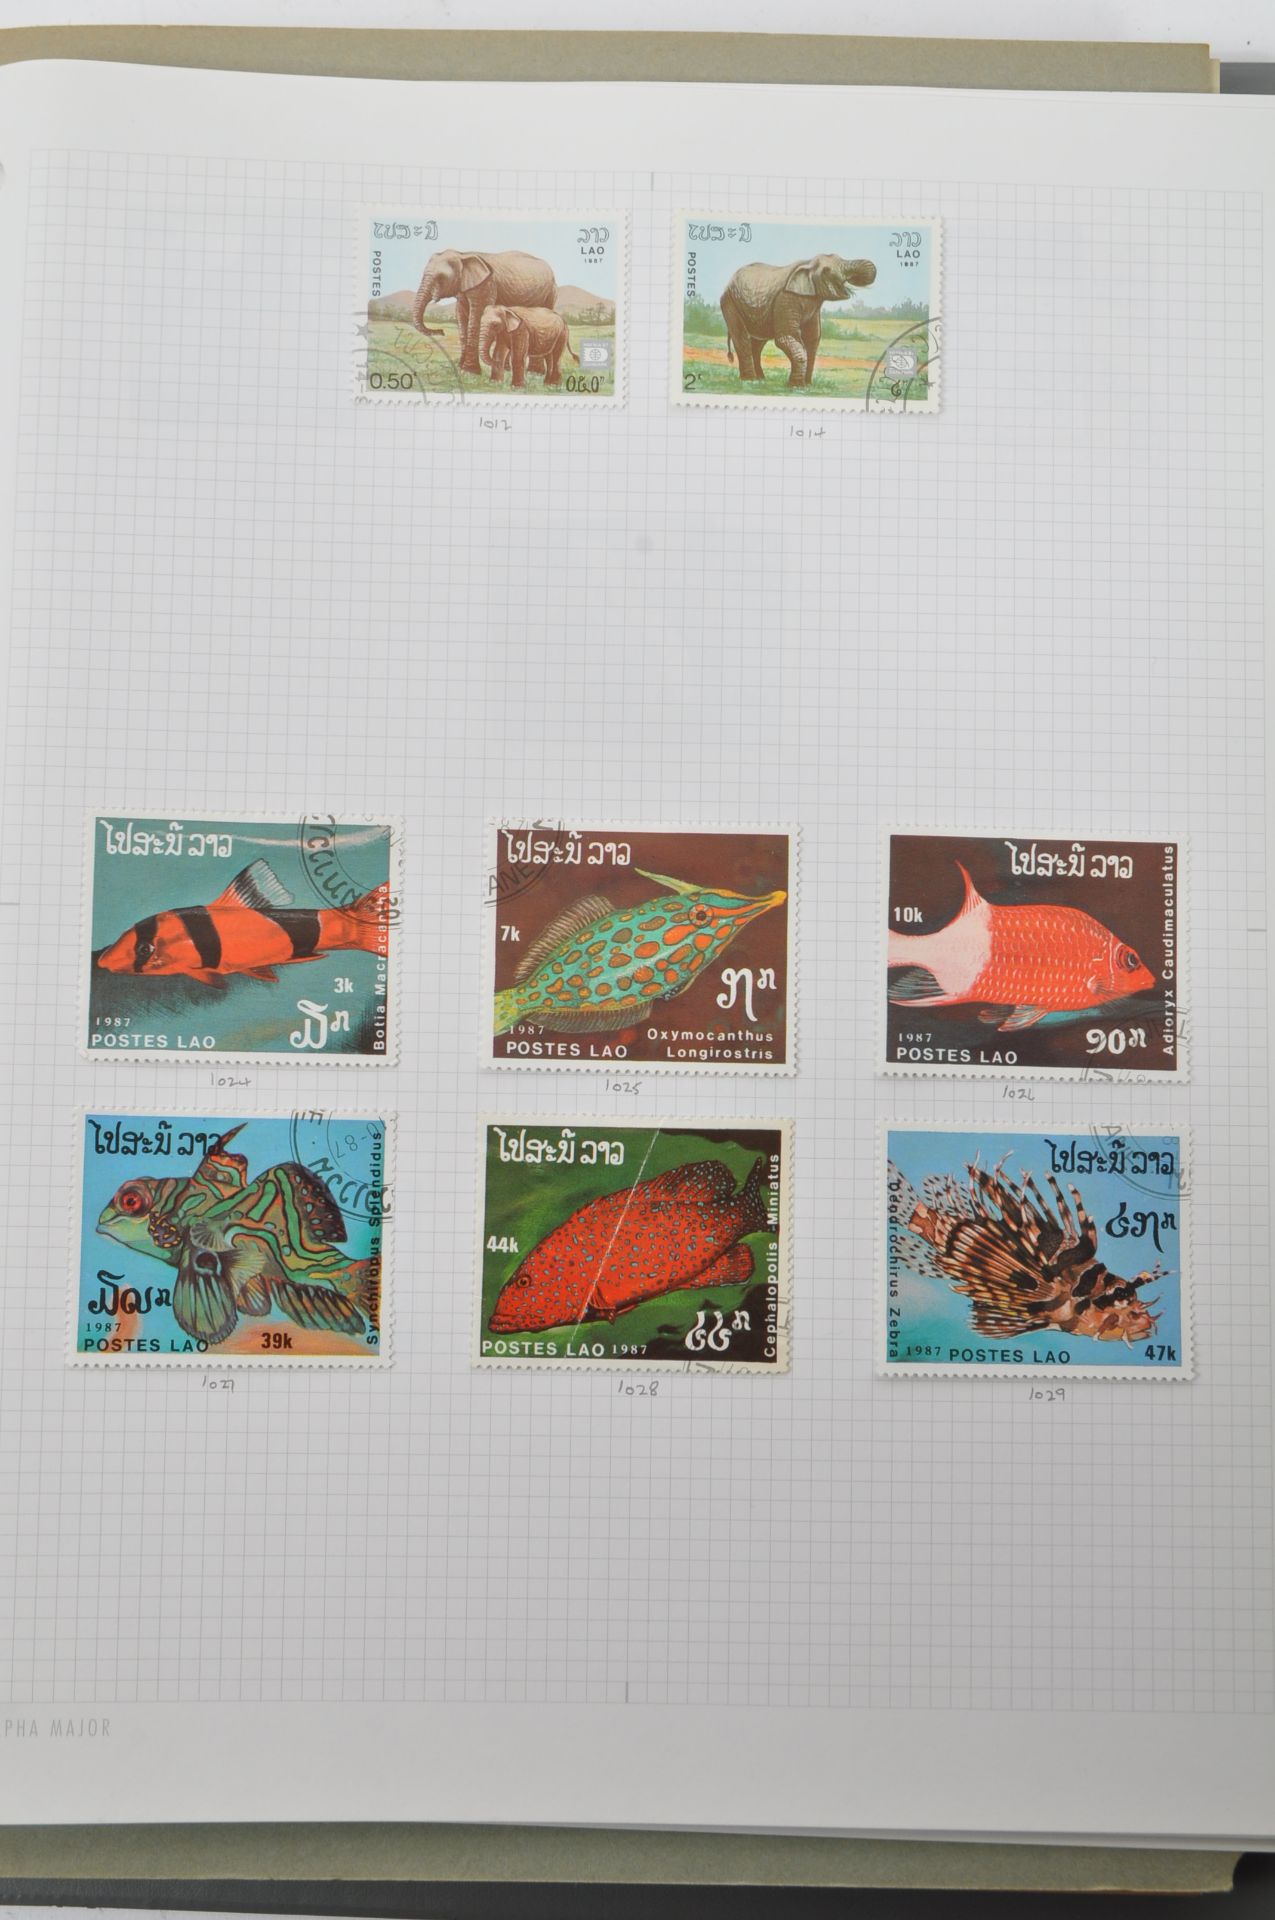 COLLECTION OF VINTAGE 20TH CENTURY POSTAGE STAMPS - Image 4 of 7